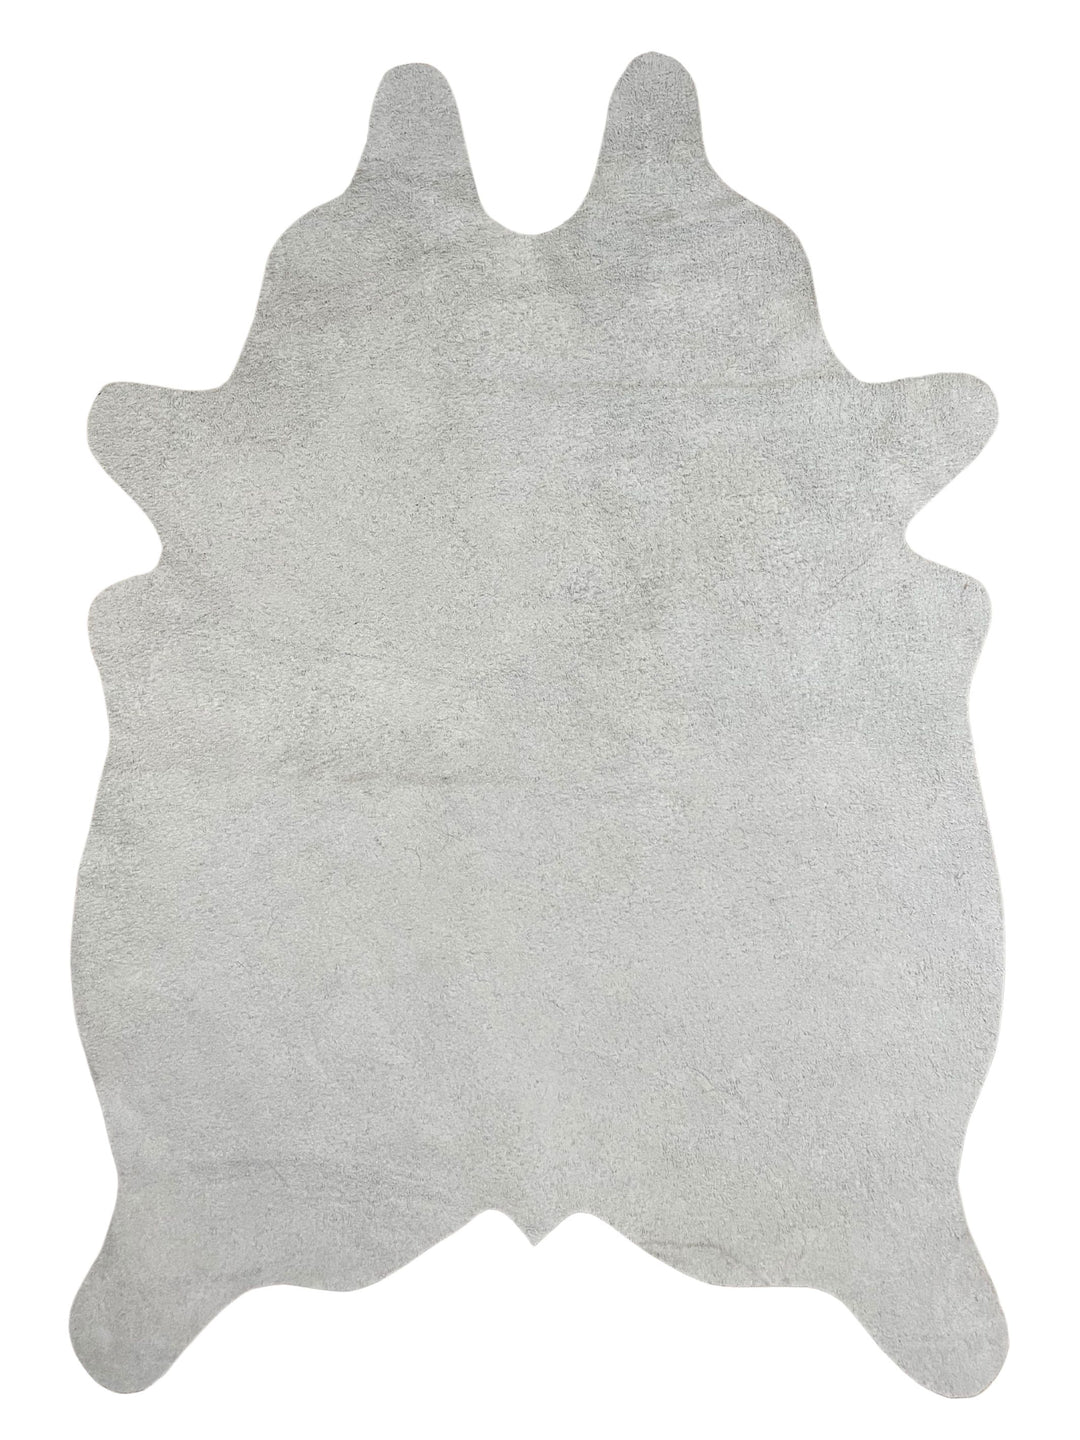 Cutout Cowhide Mini Rugs - Black and White Speckled